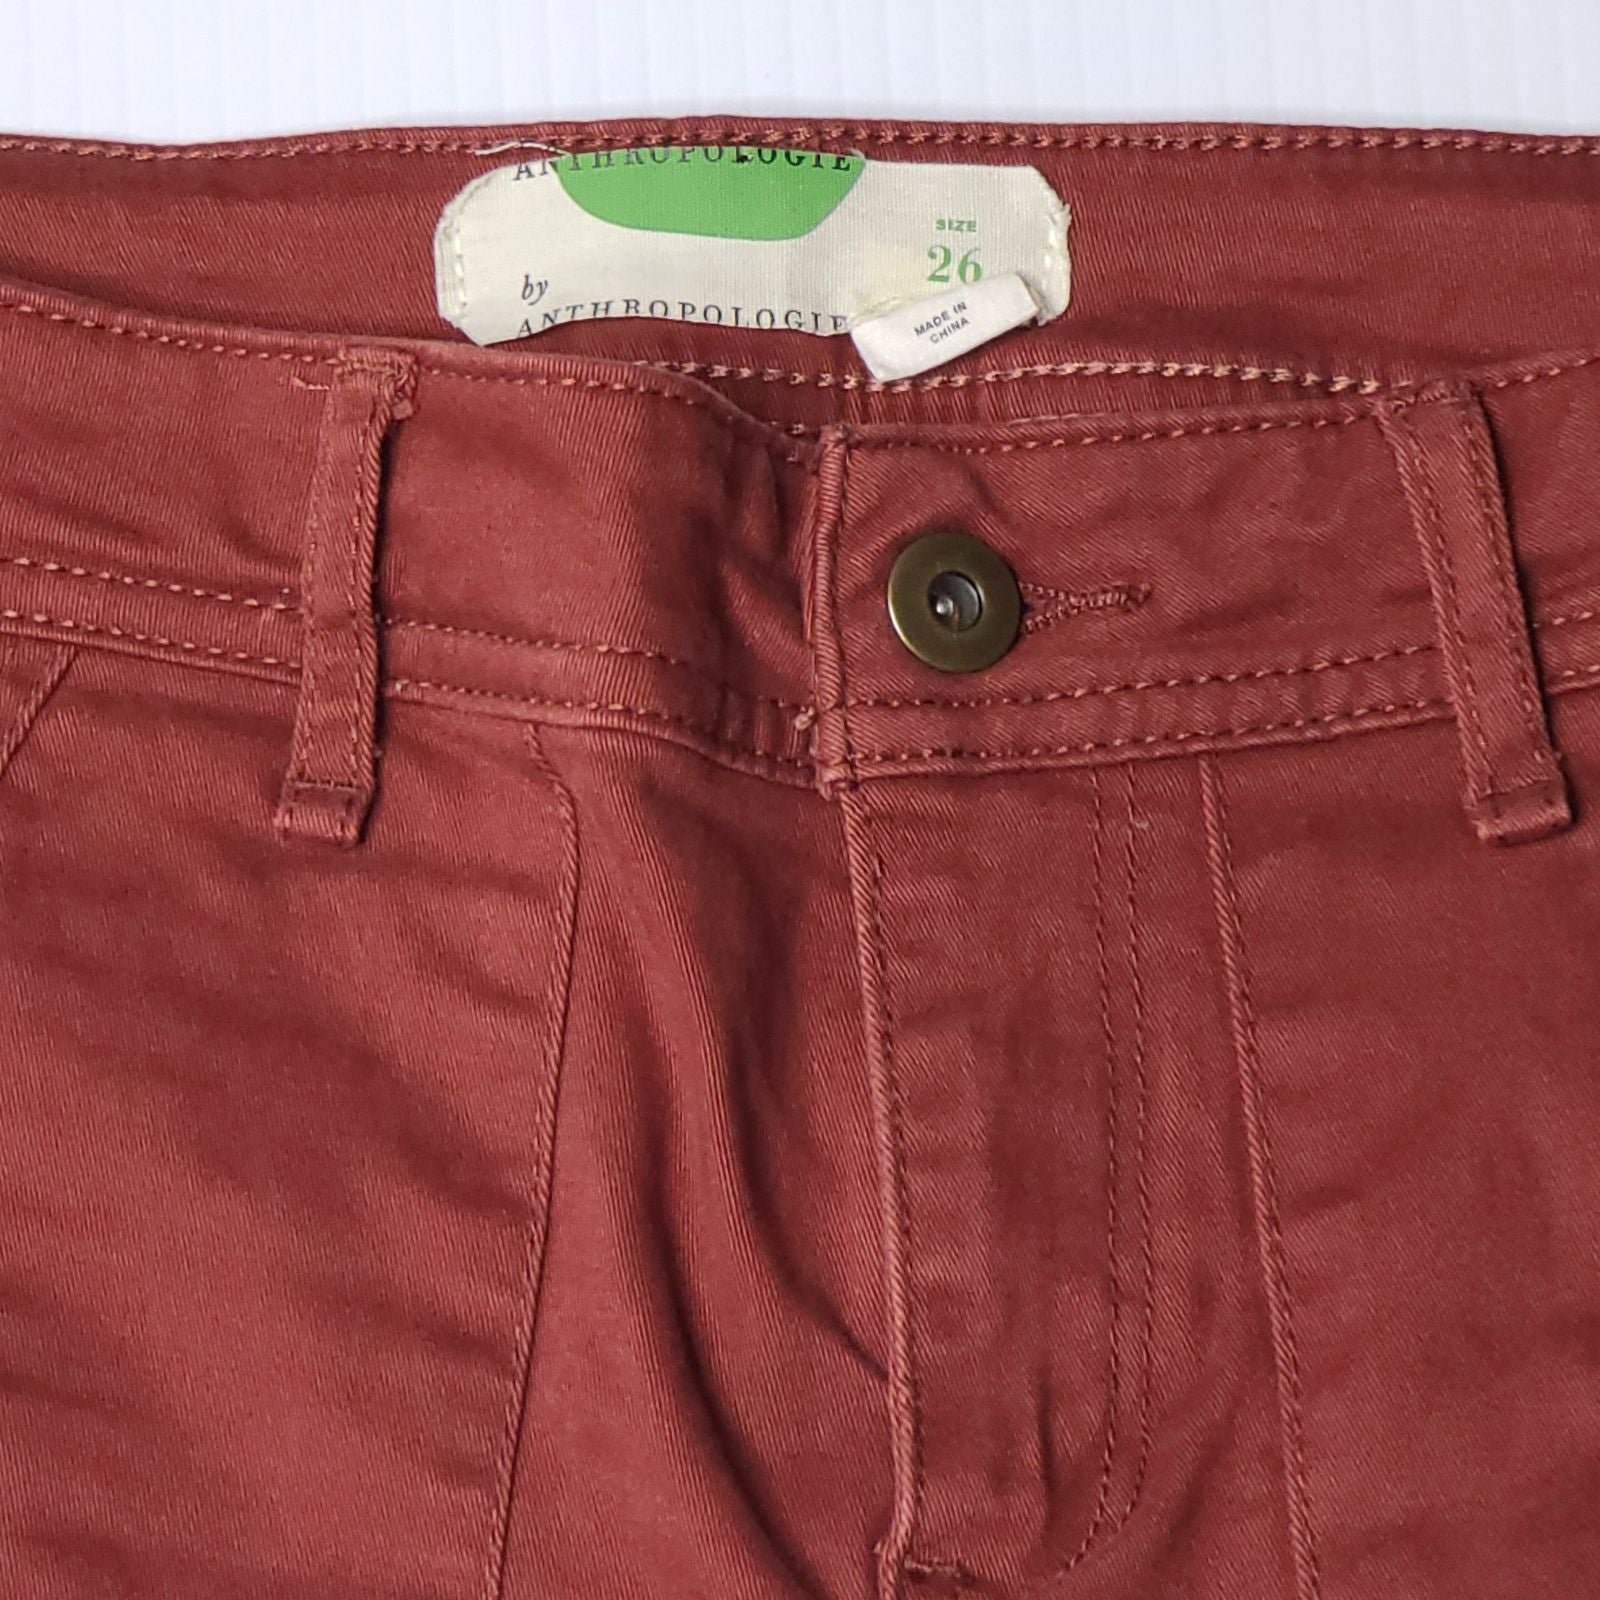 Latest  Anthropologie 26 Burnt Red Skinny Jeans ouXpjFajy High Quaity